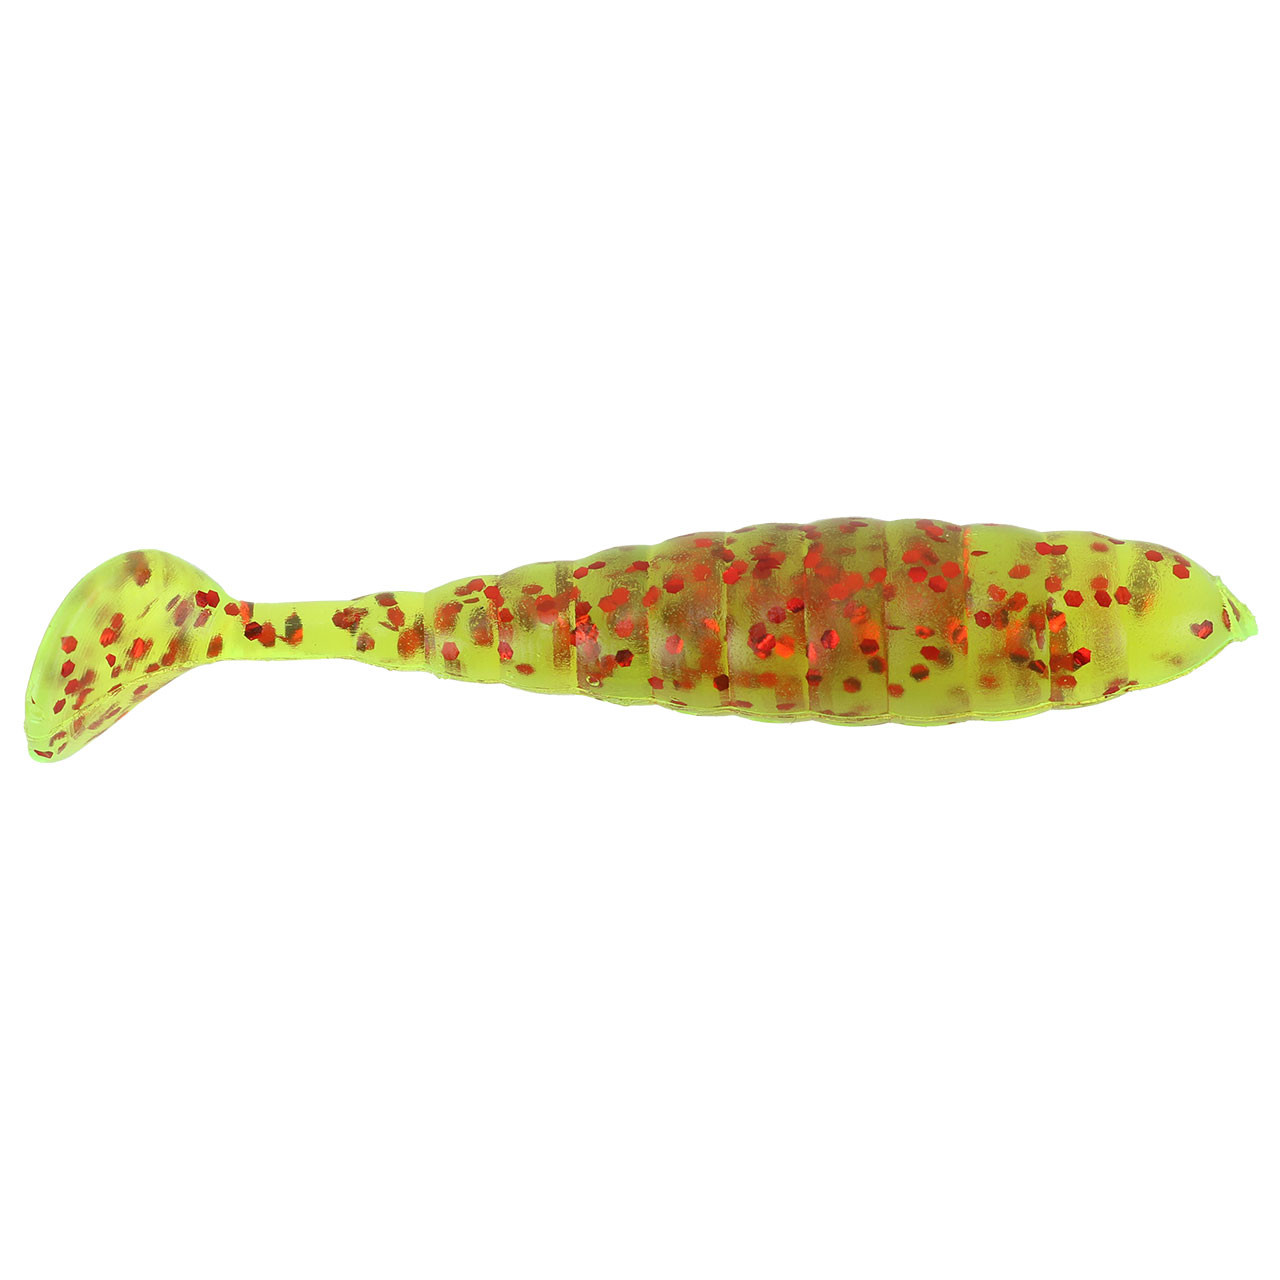 Mister Twister Sassy Grub - 3' - Chartreuse Red Flake